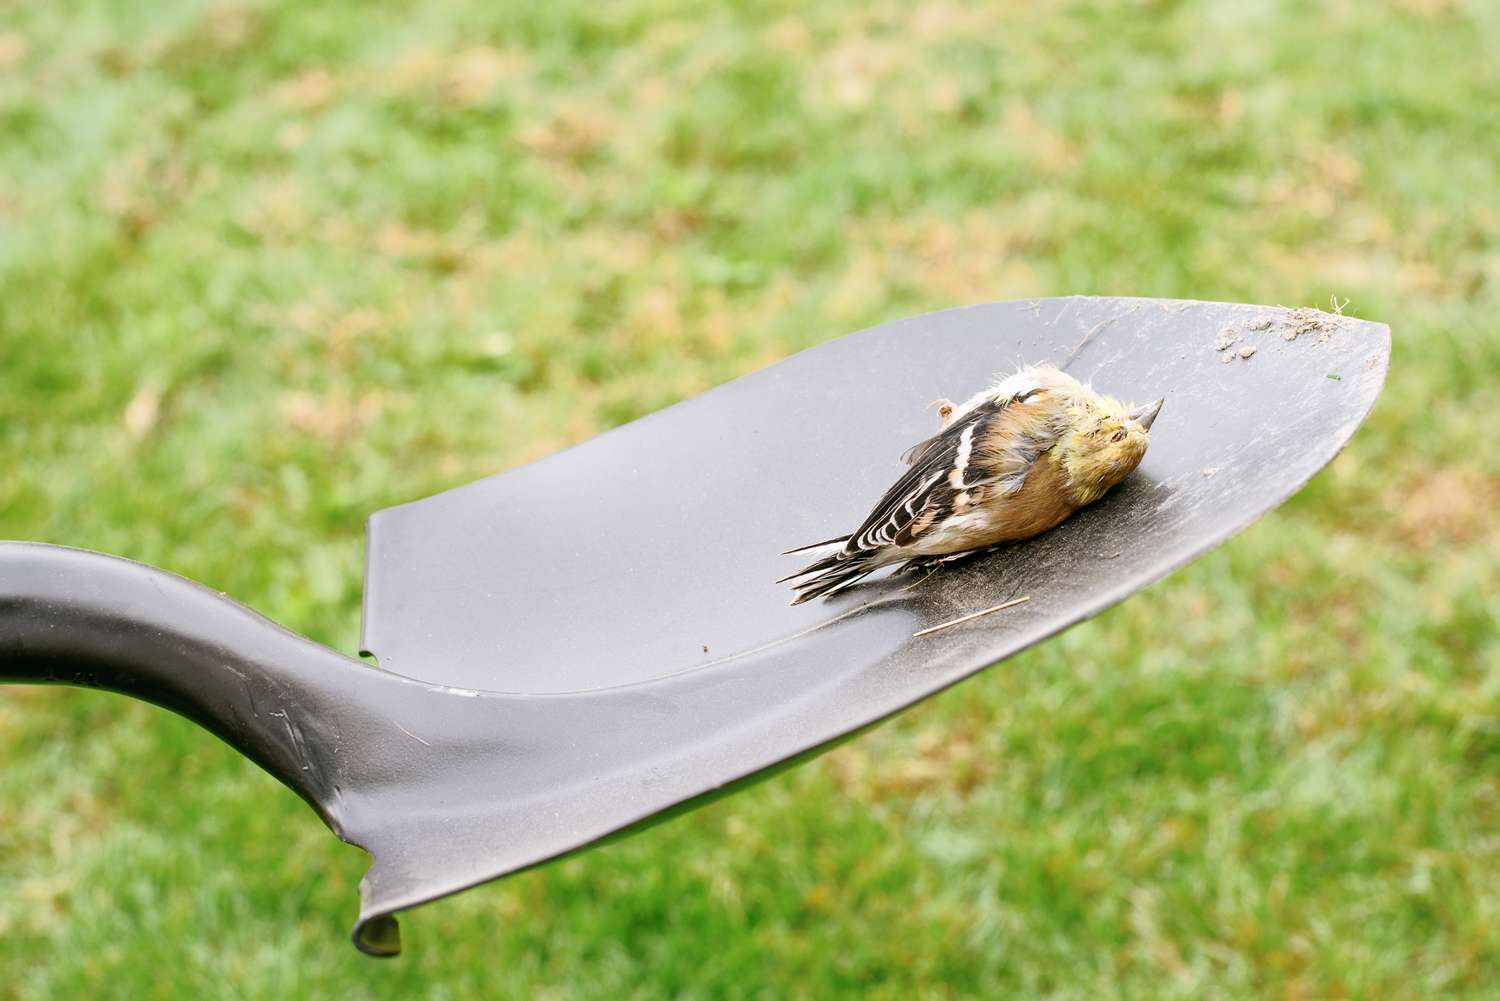 Dead bird picked up by shovel